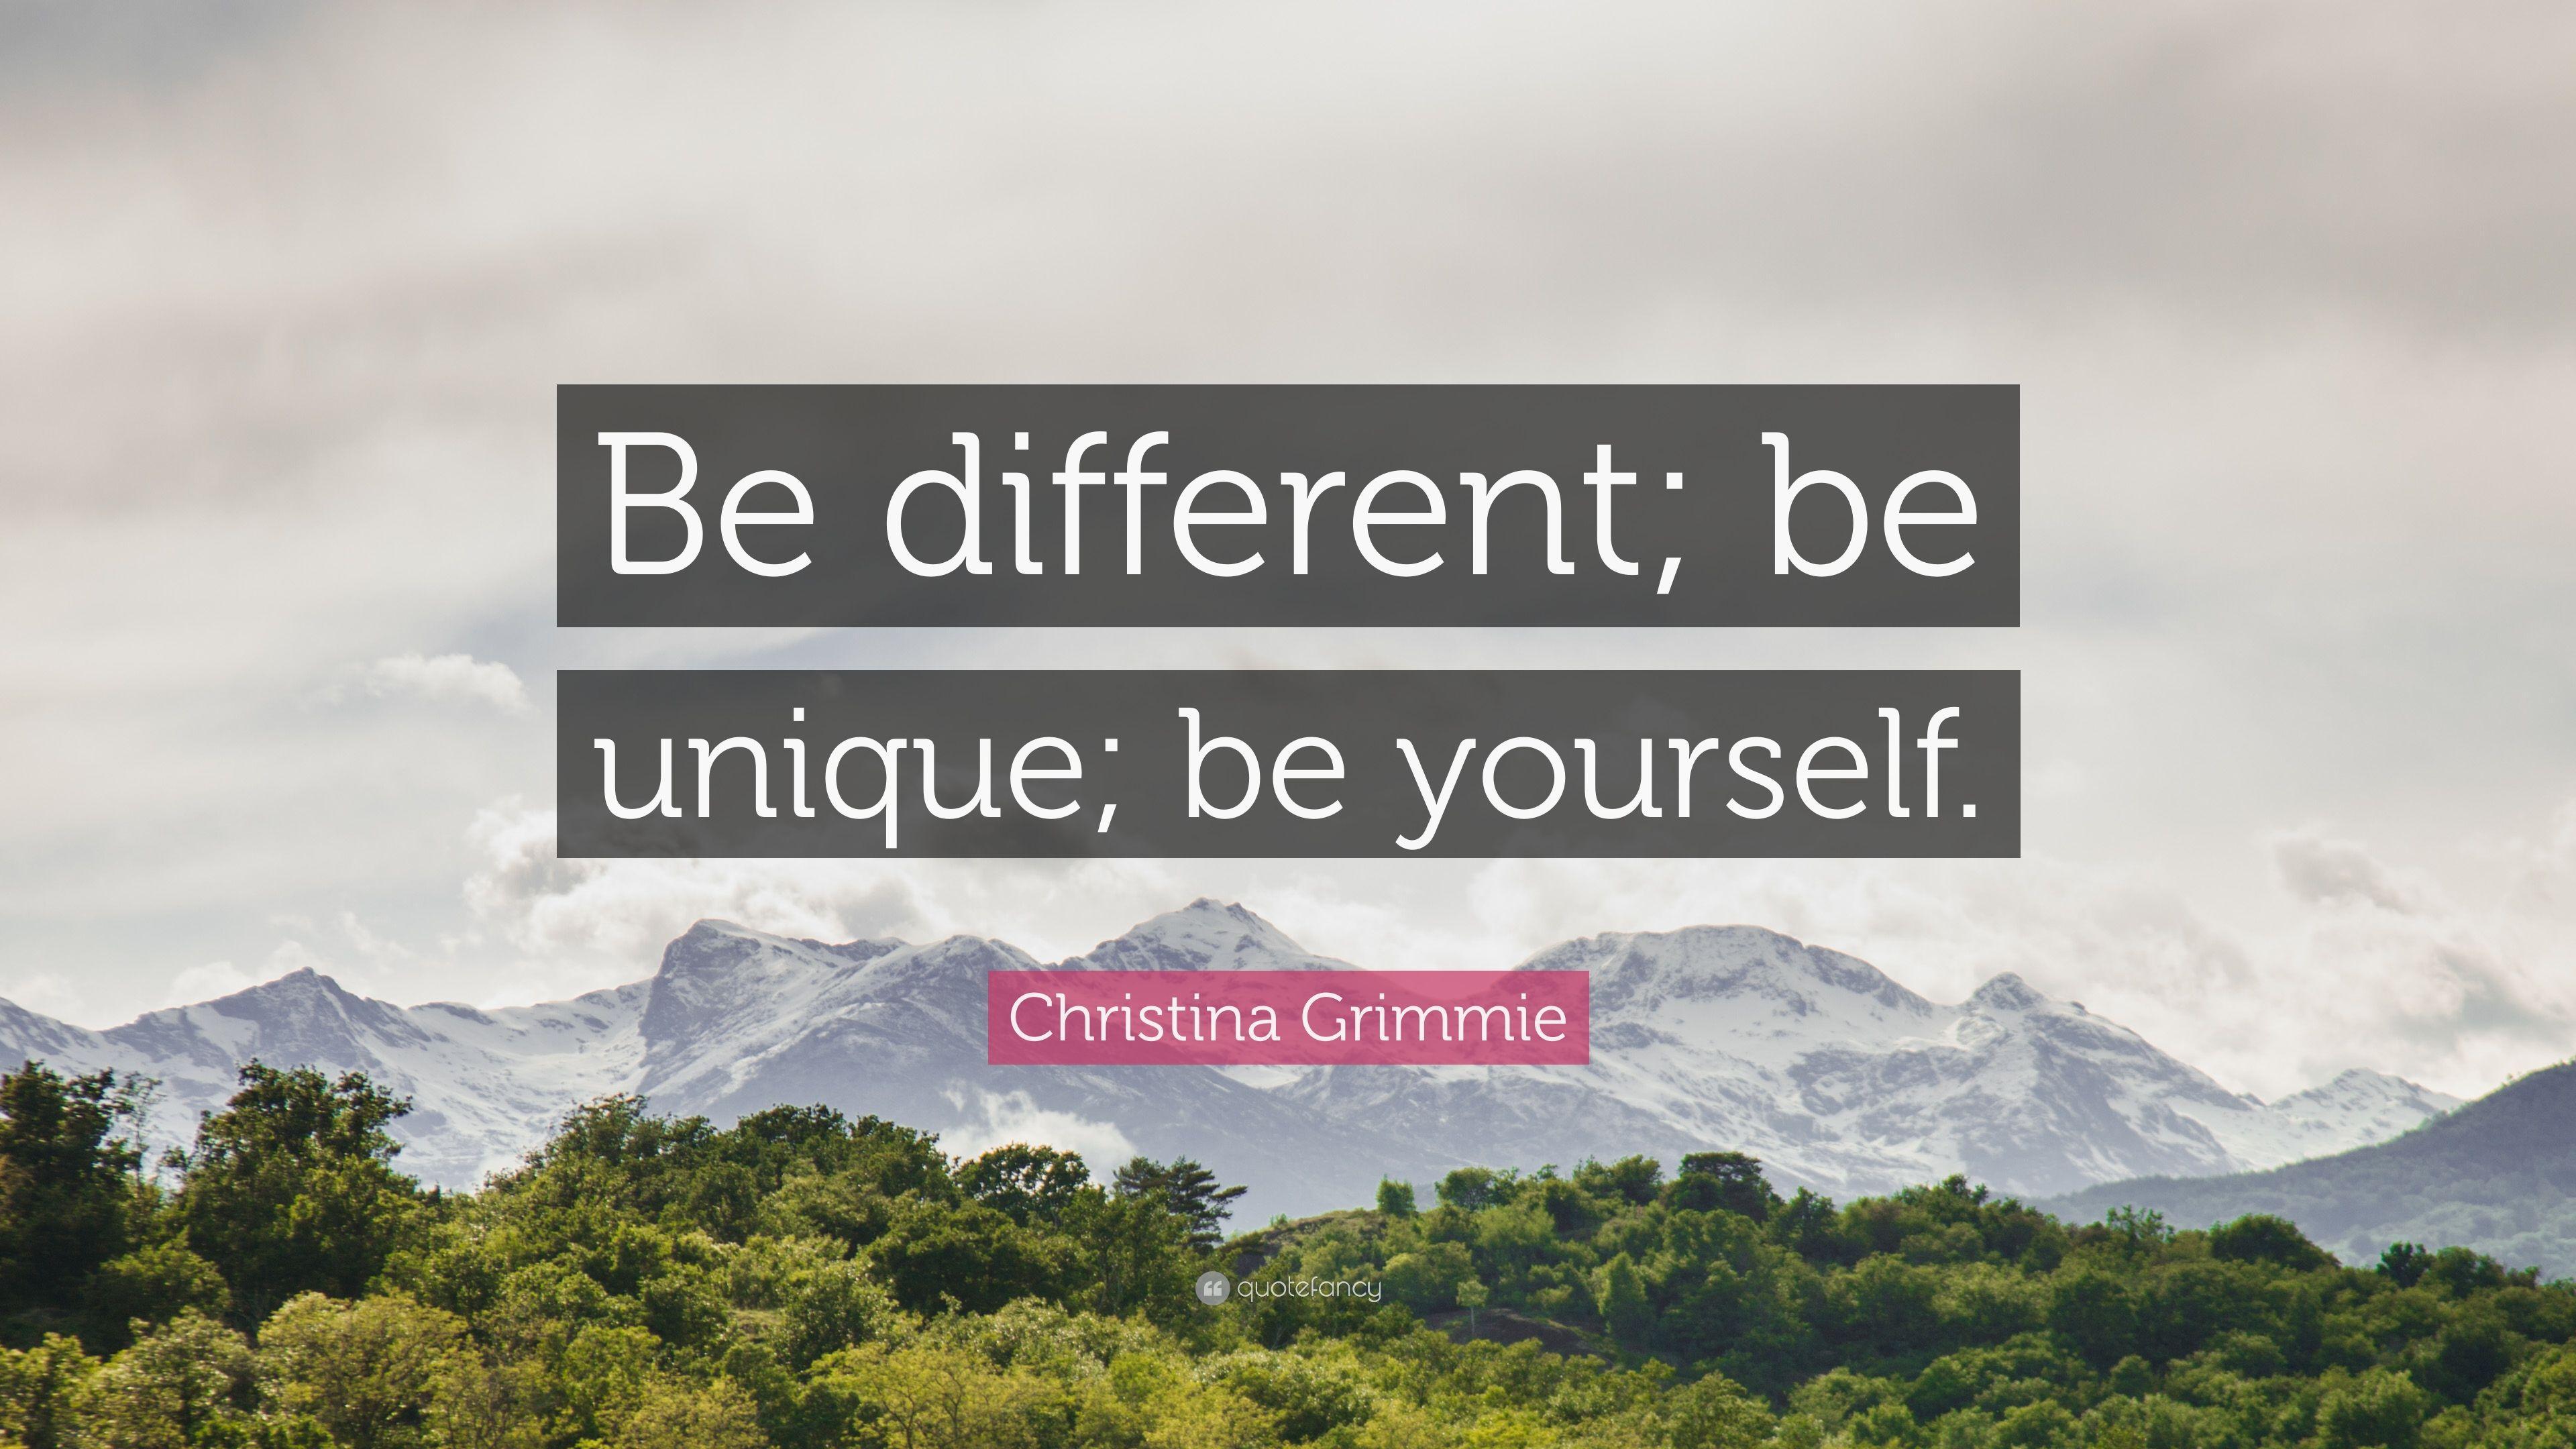 Christina Grimmie Quote: “Be different; be unique; be yourself